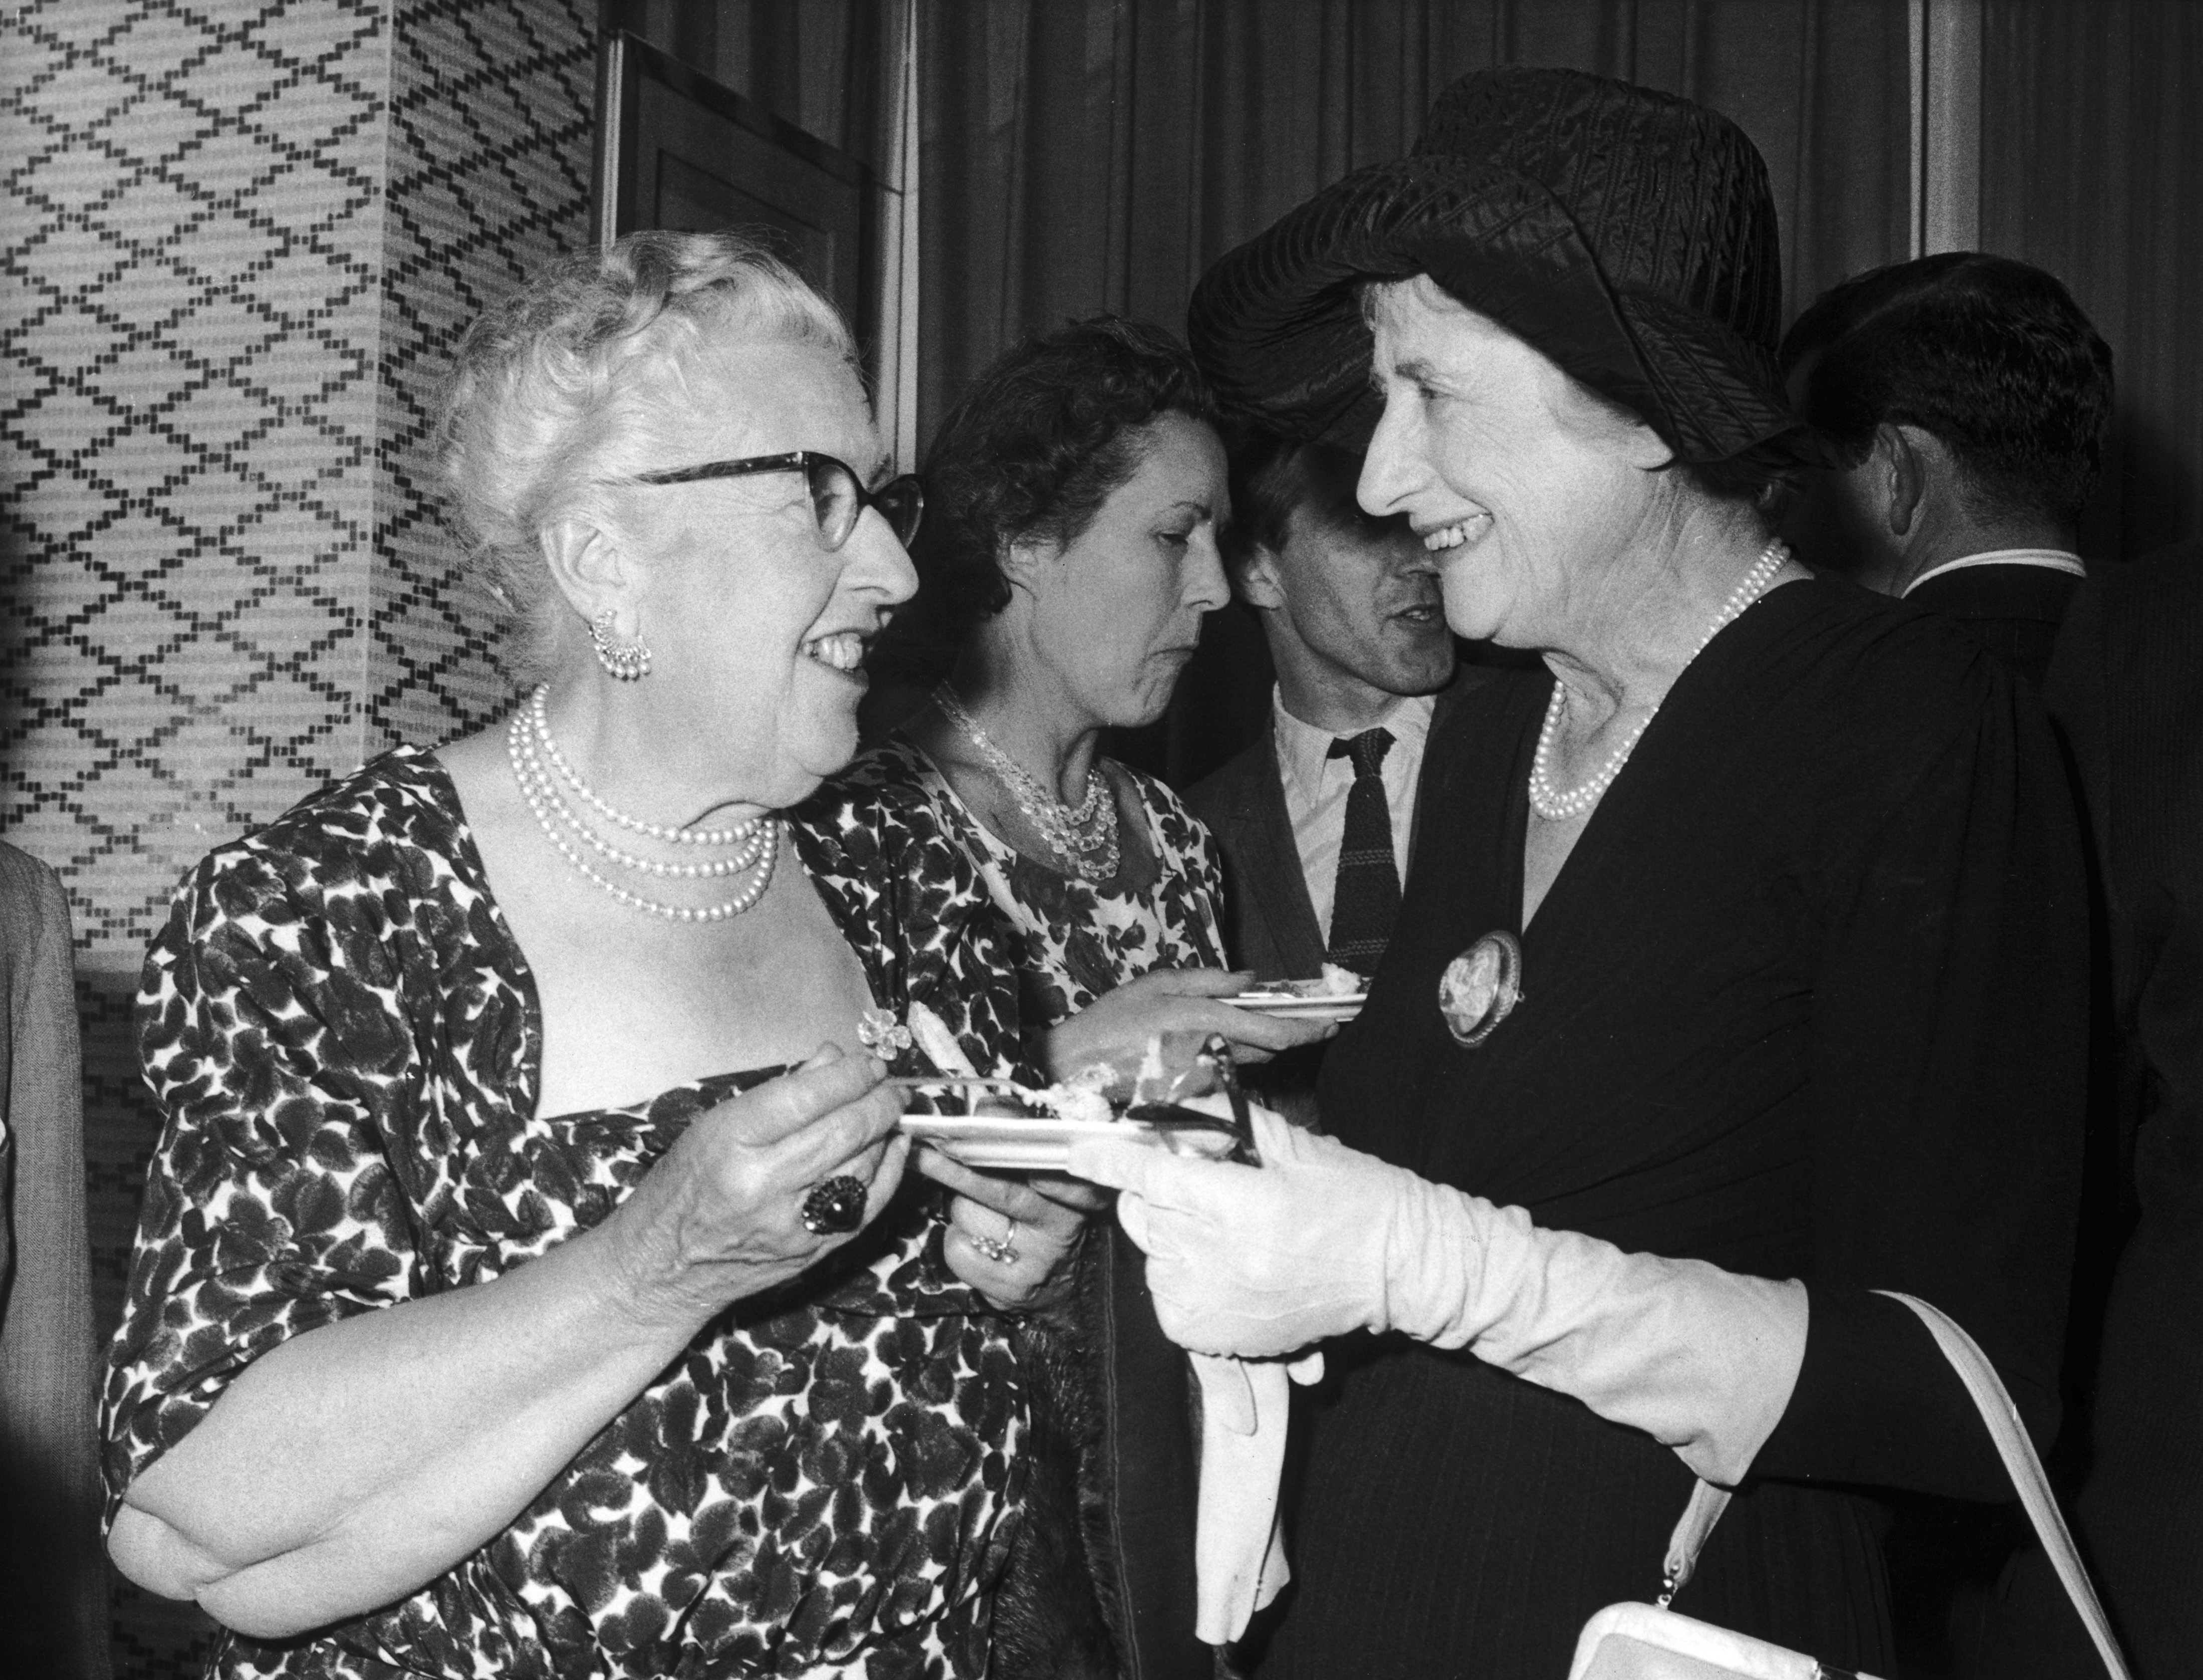 Internationally successful crime writers Agatha Christie  and Ngaio Marsh meet at a party at the Savoy Hotel, June 1960. (Getty)